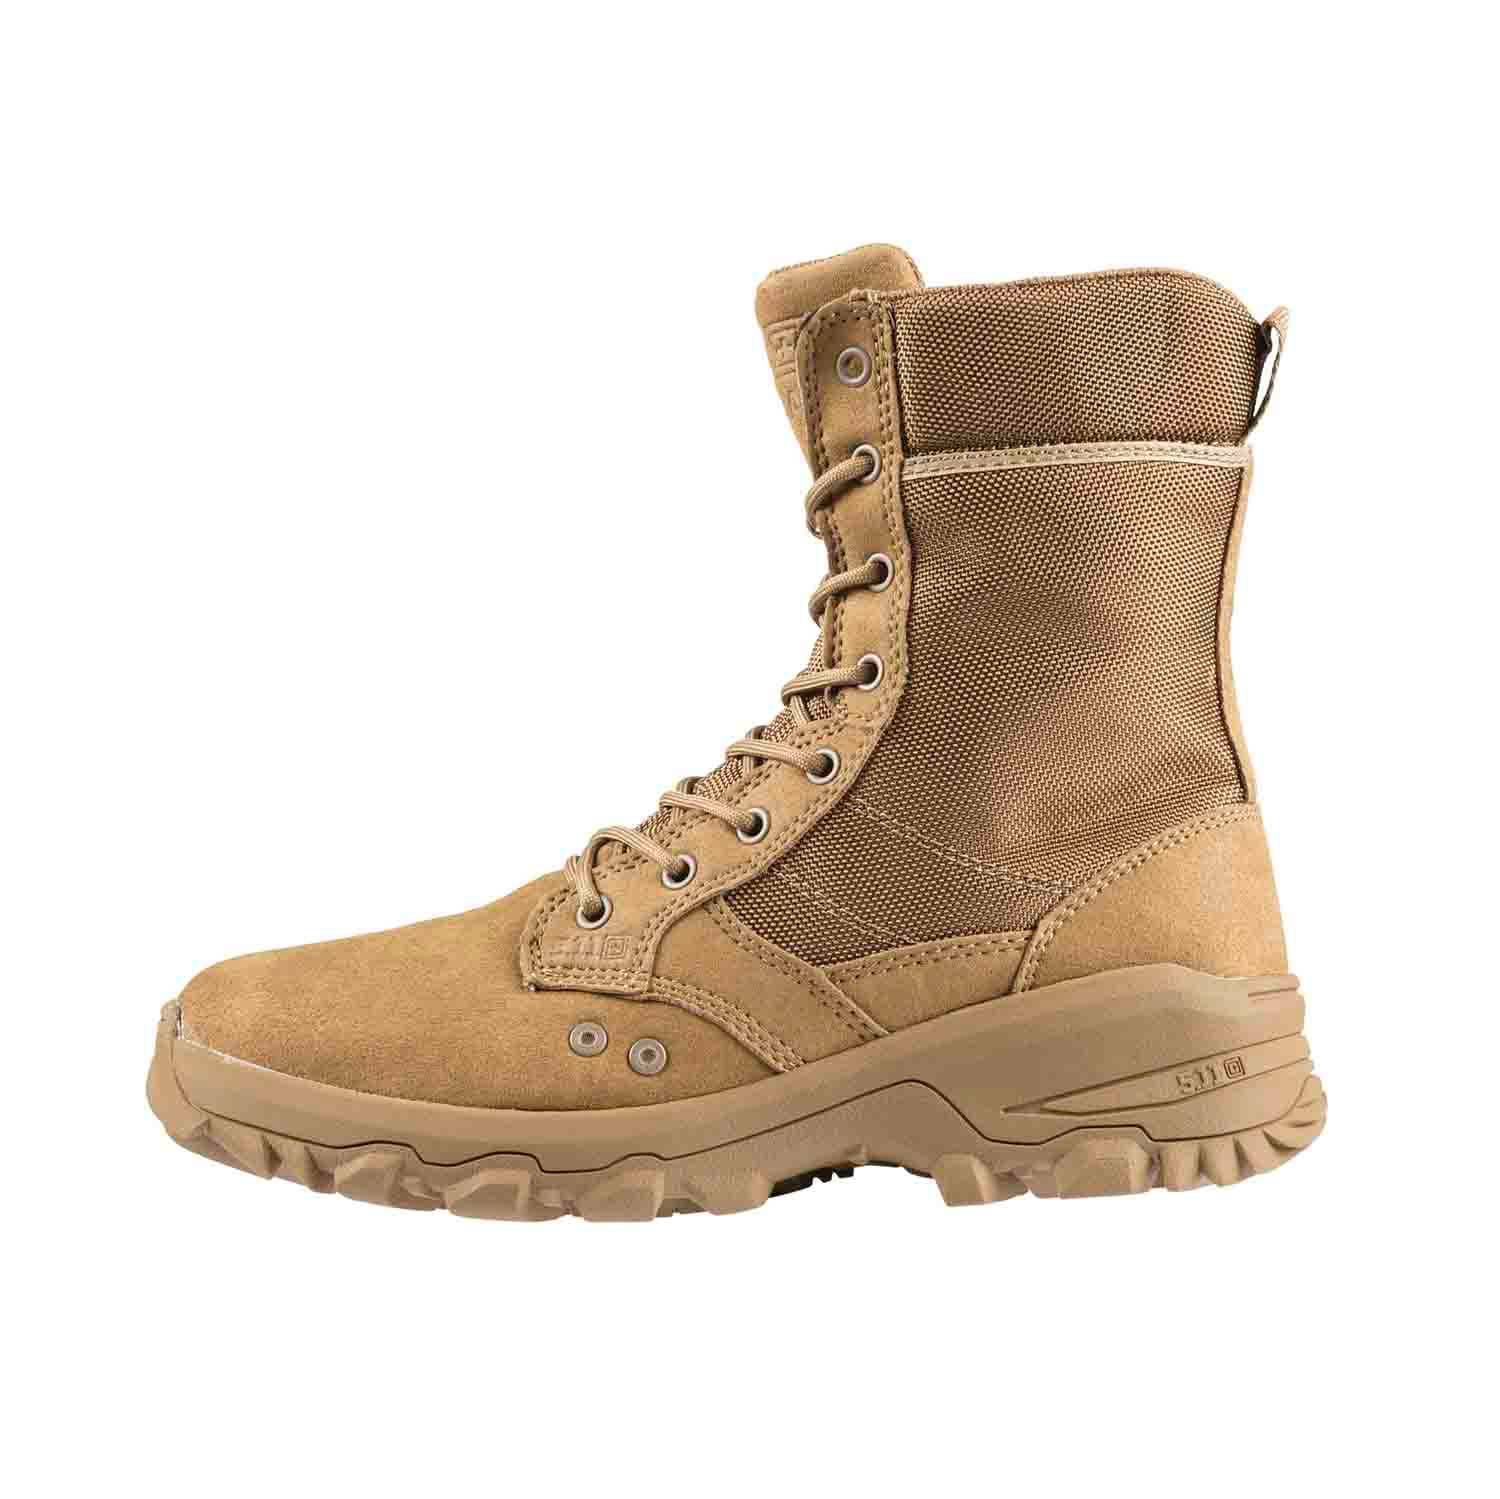 5.11 Tactical Jungle Road Speed 3.0 Boots | Brown Duty Boots